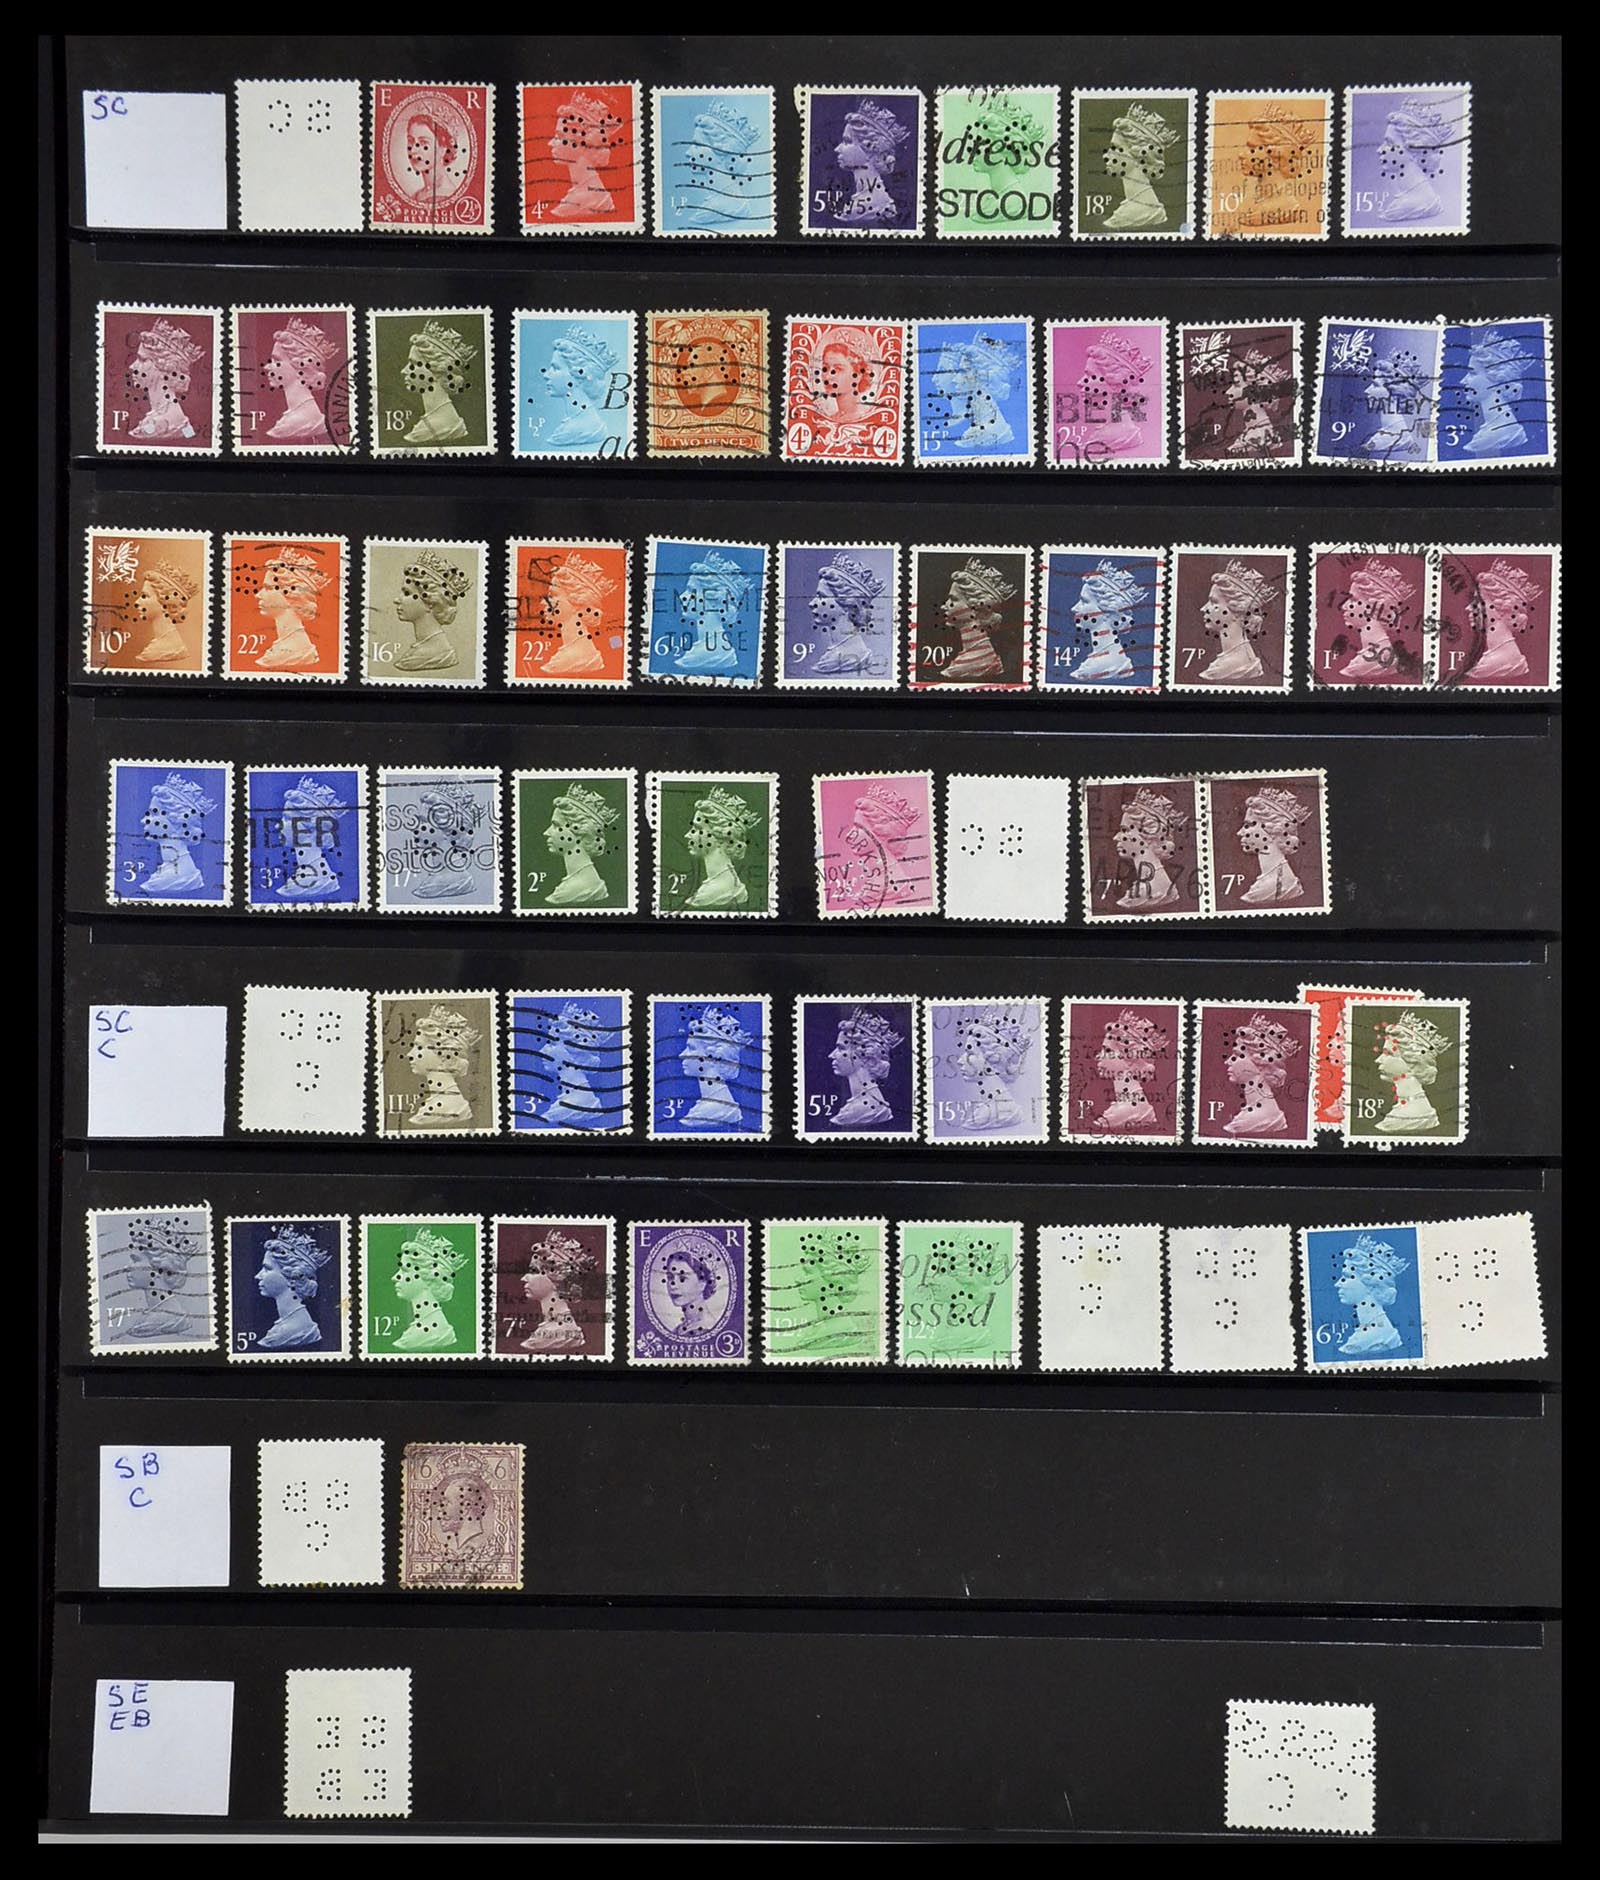 34408 708 - Stamp Collection 34408 World perfins 1870-1980.